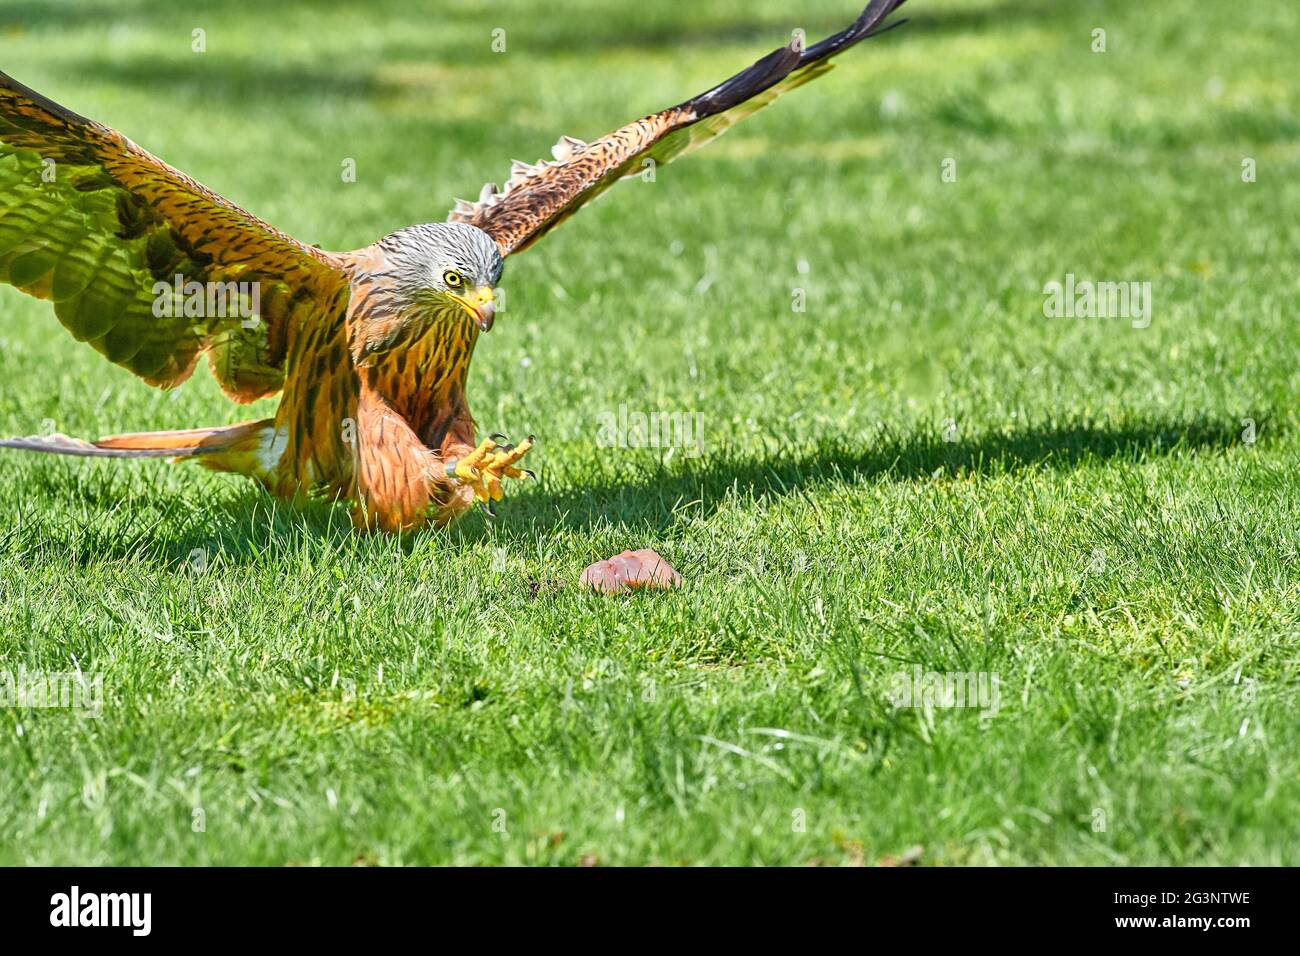 Concentrated look in the eye of a red kite protected bird as its outstretched claws are about to grab a piece of meat. Stock Photo